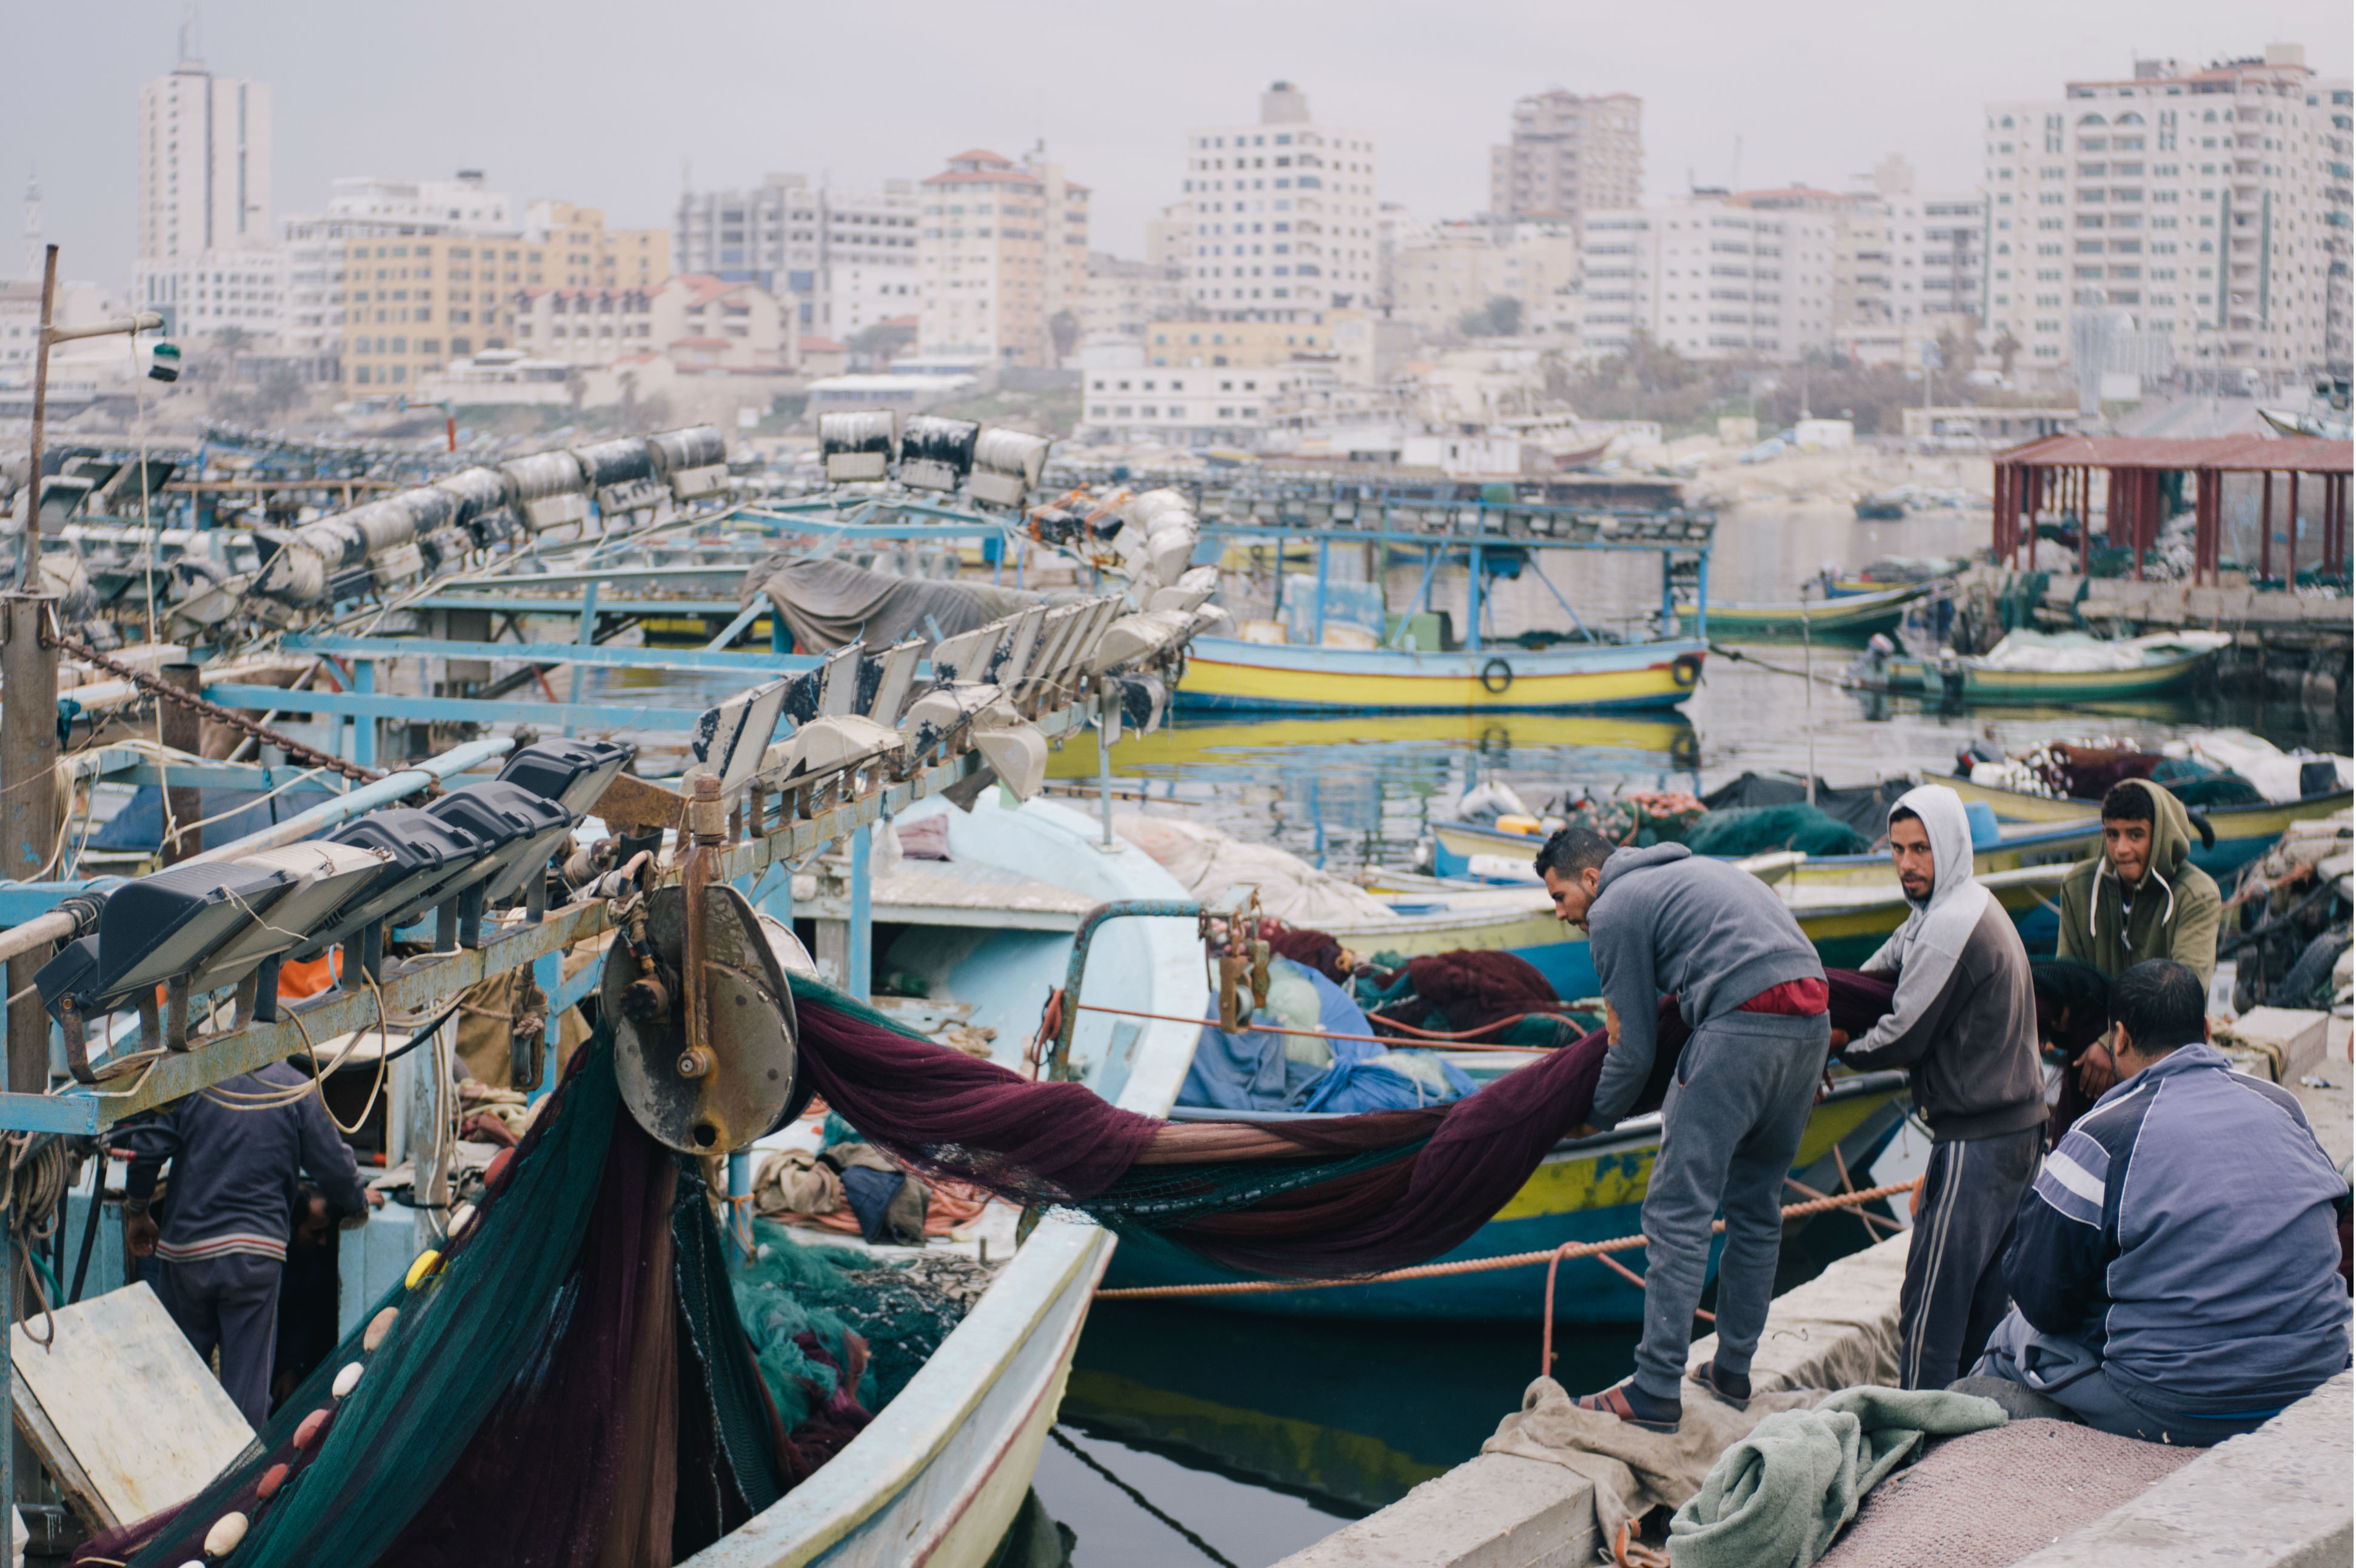 In the morning, when the air is still heavy with moisture, fishermen board small trawlers and set out from Gaza City's port to search for a catch within the six nautical miles that Israel allows them to fish